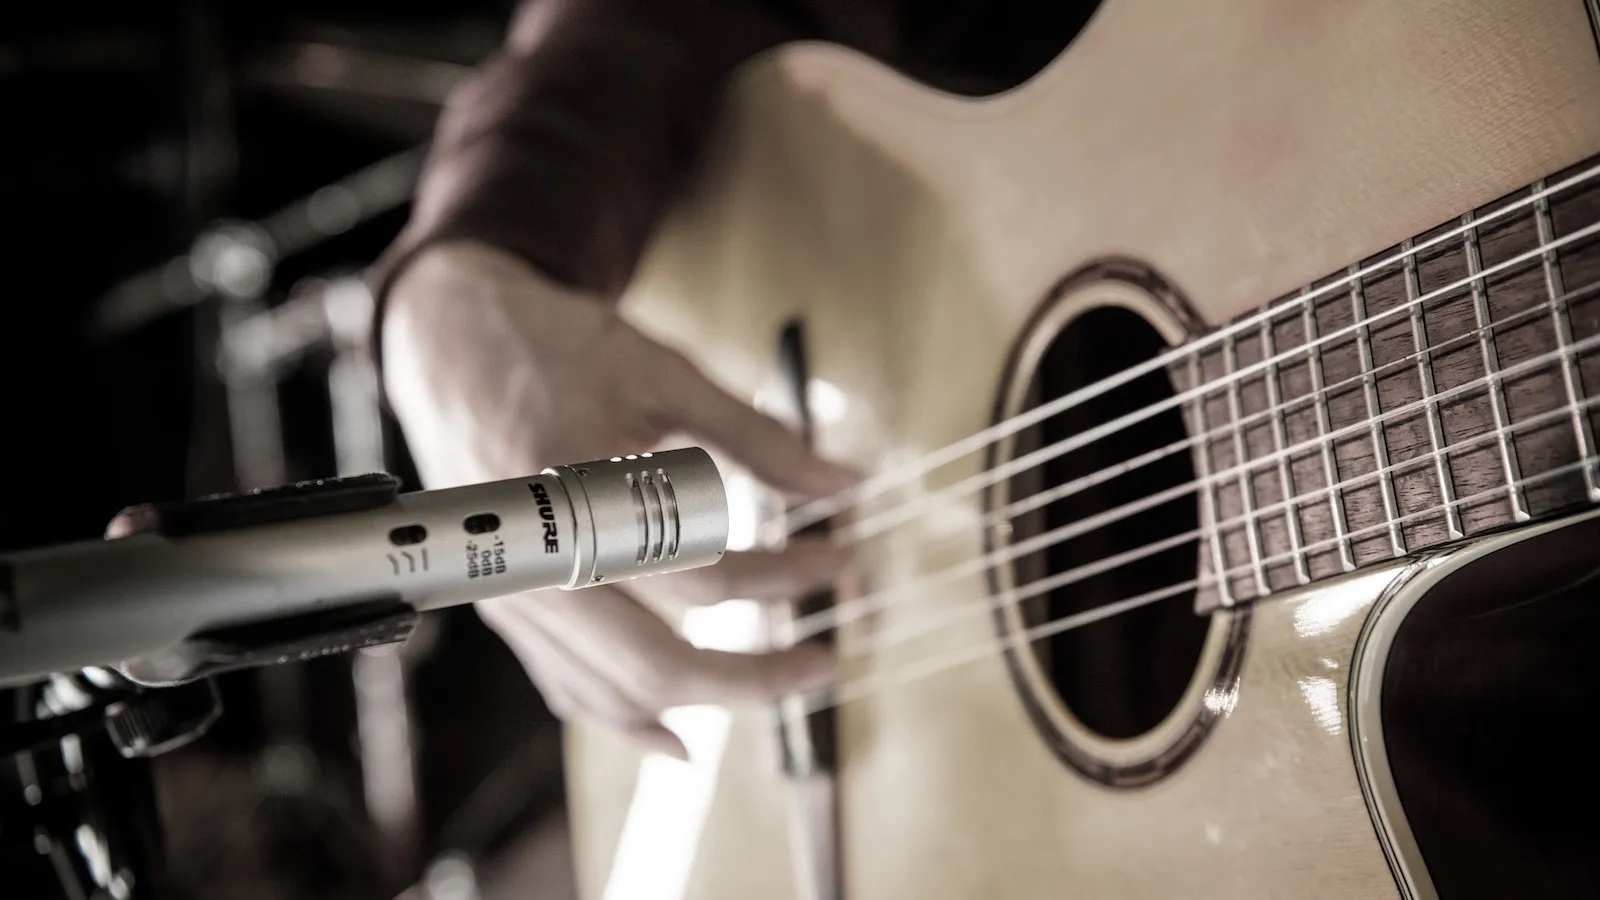 A KSM137 mic in front of an acoustic guitar